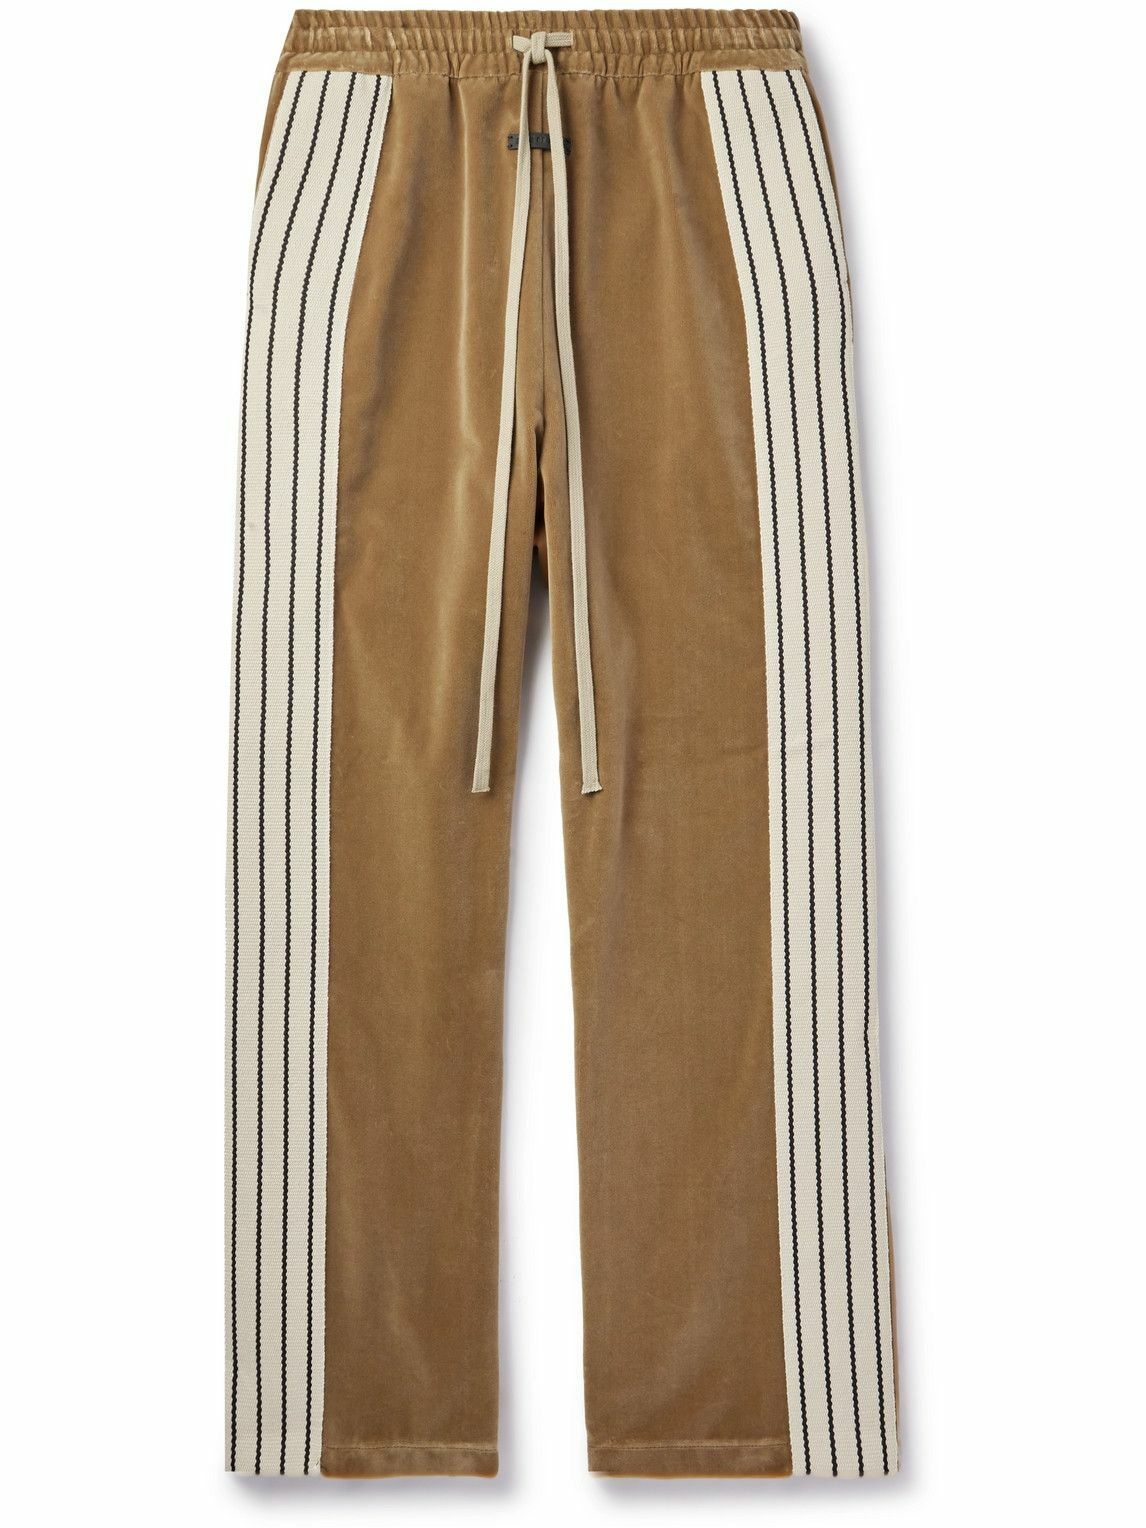 Photo: Fear of God - Forum Striped Canvas-Trimmed Cotton and Modal-Blend Velvet Sweatpants - Brown